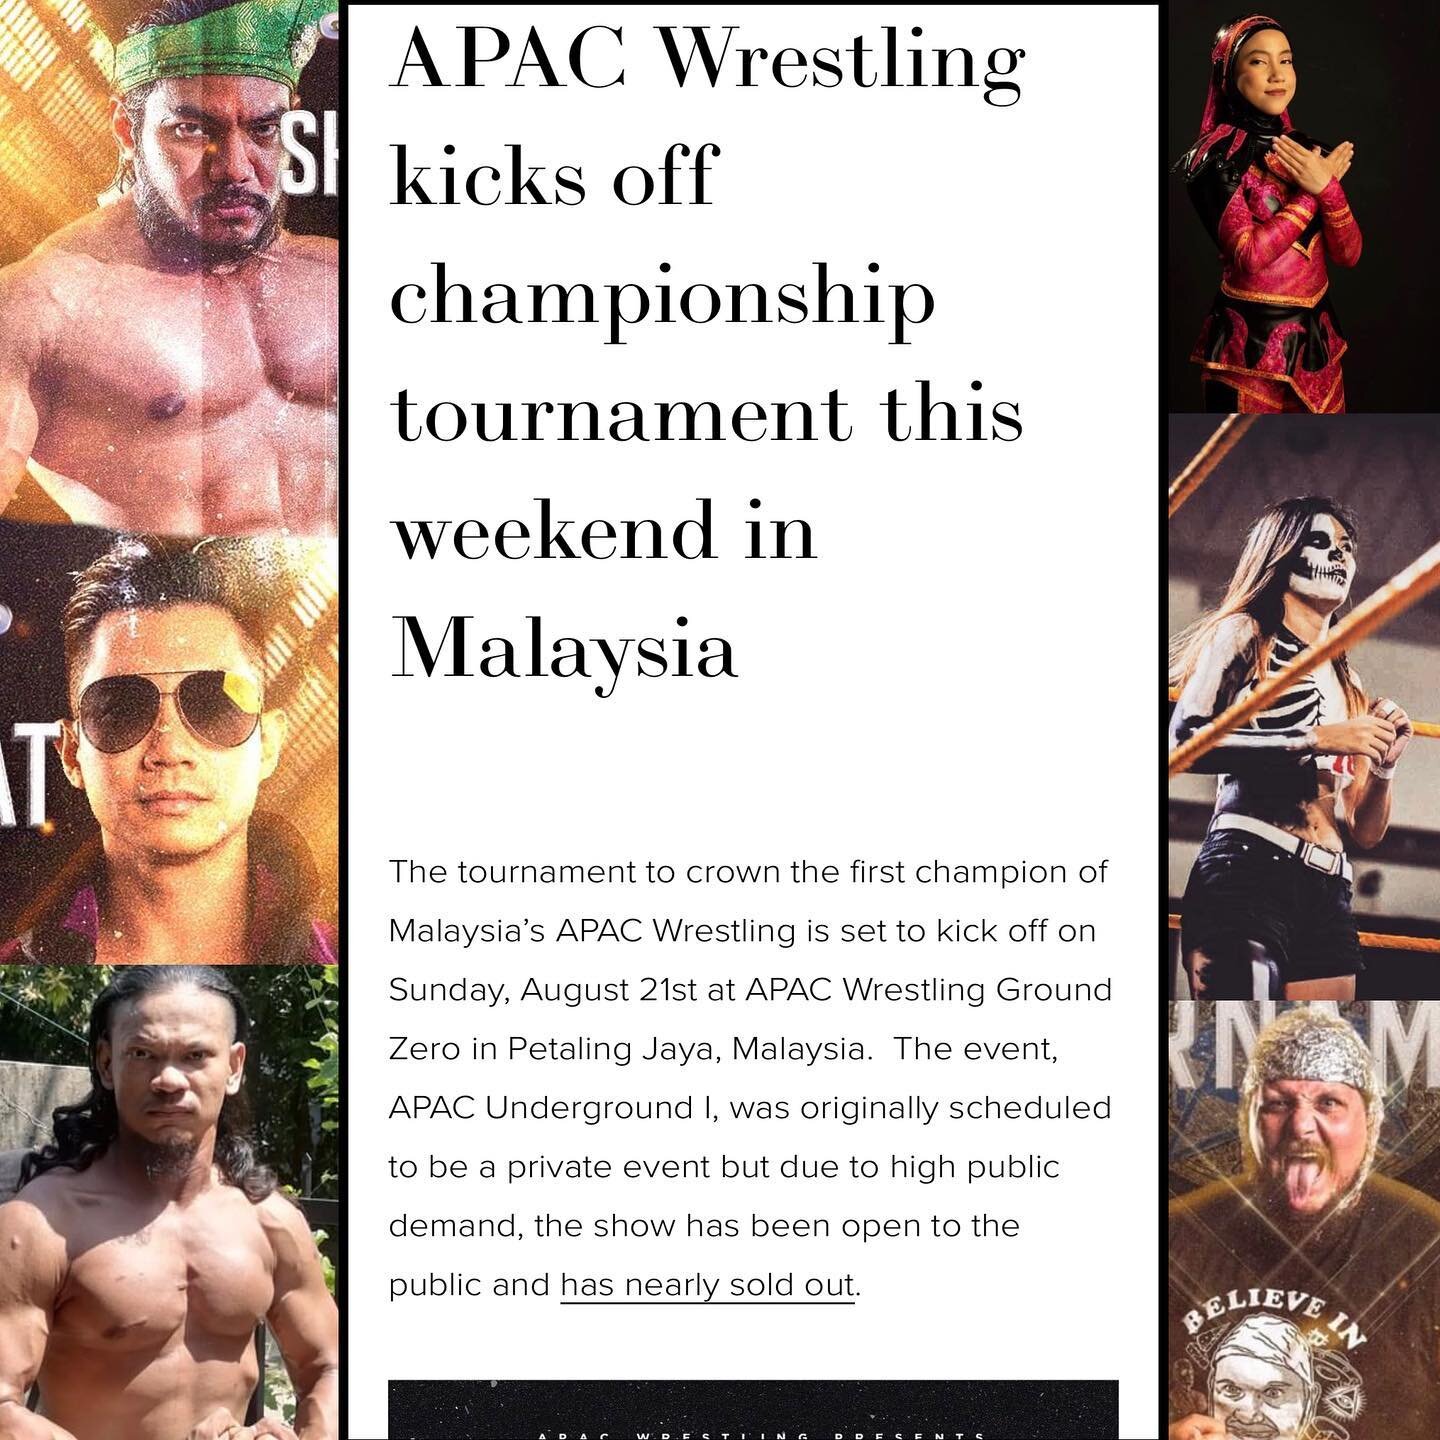 New on wrestlemap.com!  @apacwrestling set to launch tournament to crown first champion this weekend!

  _____________________________ 

#wrestling #prowrestling #prowrestler #indiewrestling #wrestlingnews #prowrestlingnews #internationalwrestling #i